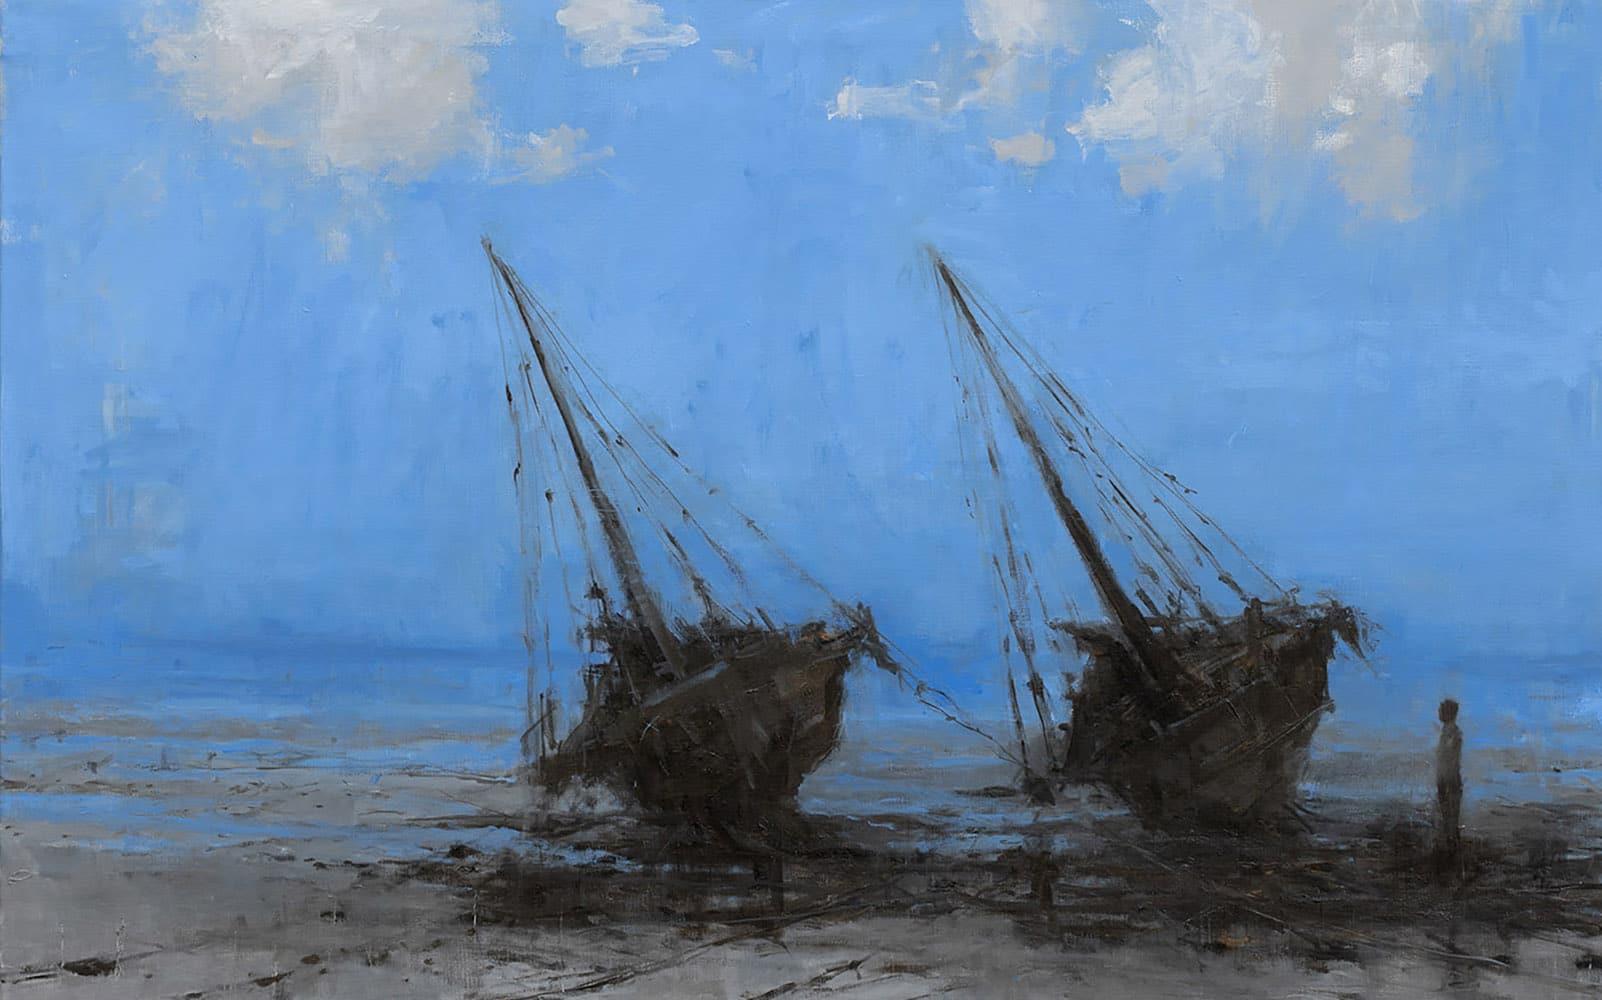 Barcas en Bagamoyo IV is a unique oil on canvas painting by Spanish contemporary artist Calo Carratalá, dimensions are 97 × 153 cm (38.2 × 60.2 in). 
The artwork is signed and comes with a certificate of authenticity.

Contemporary painter Calo